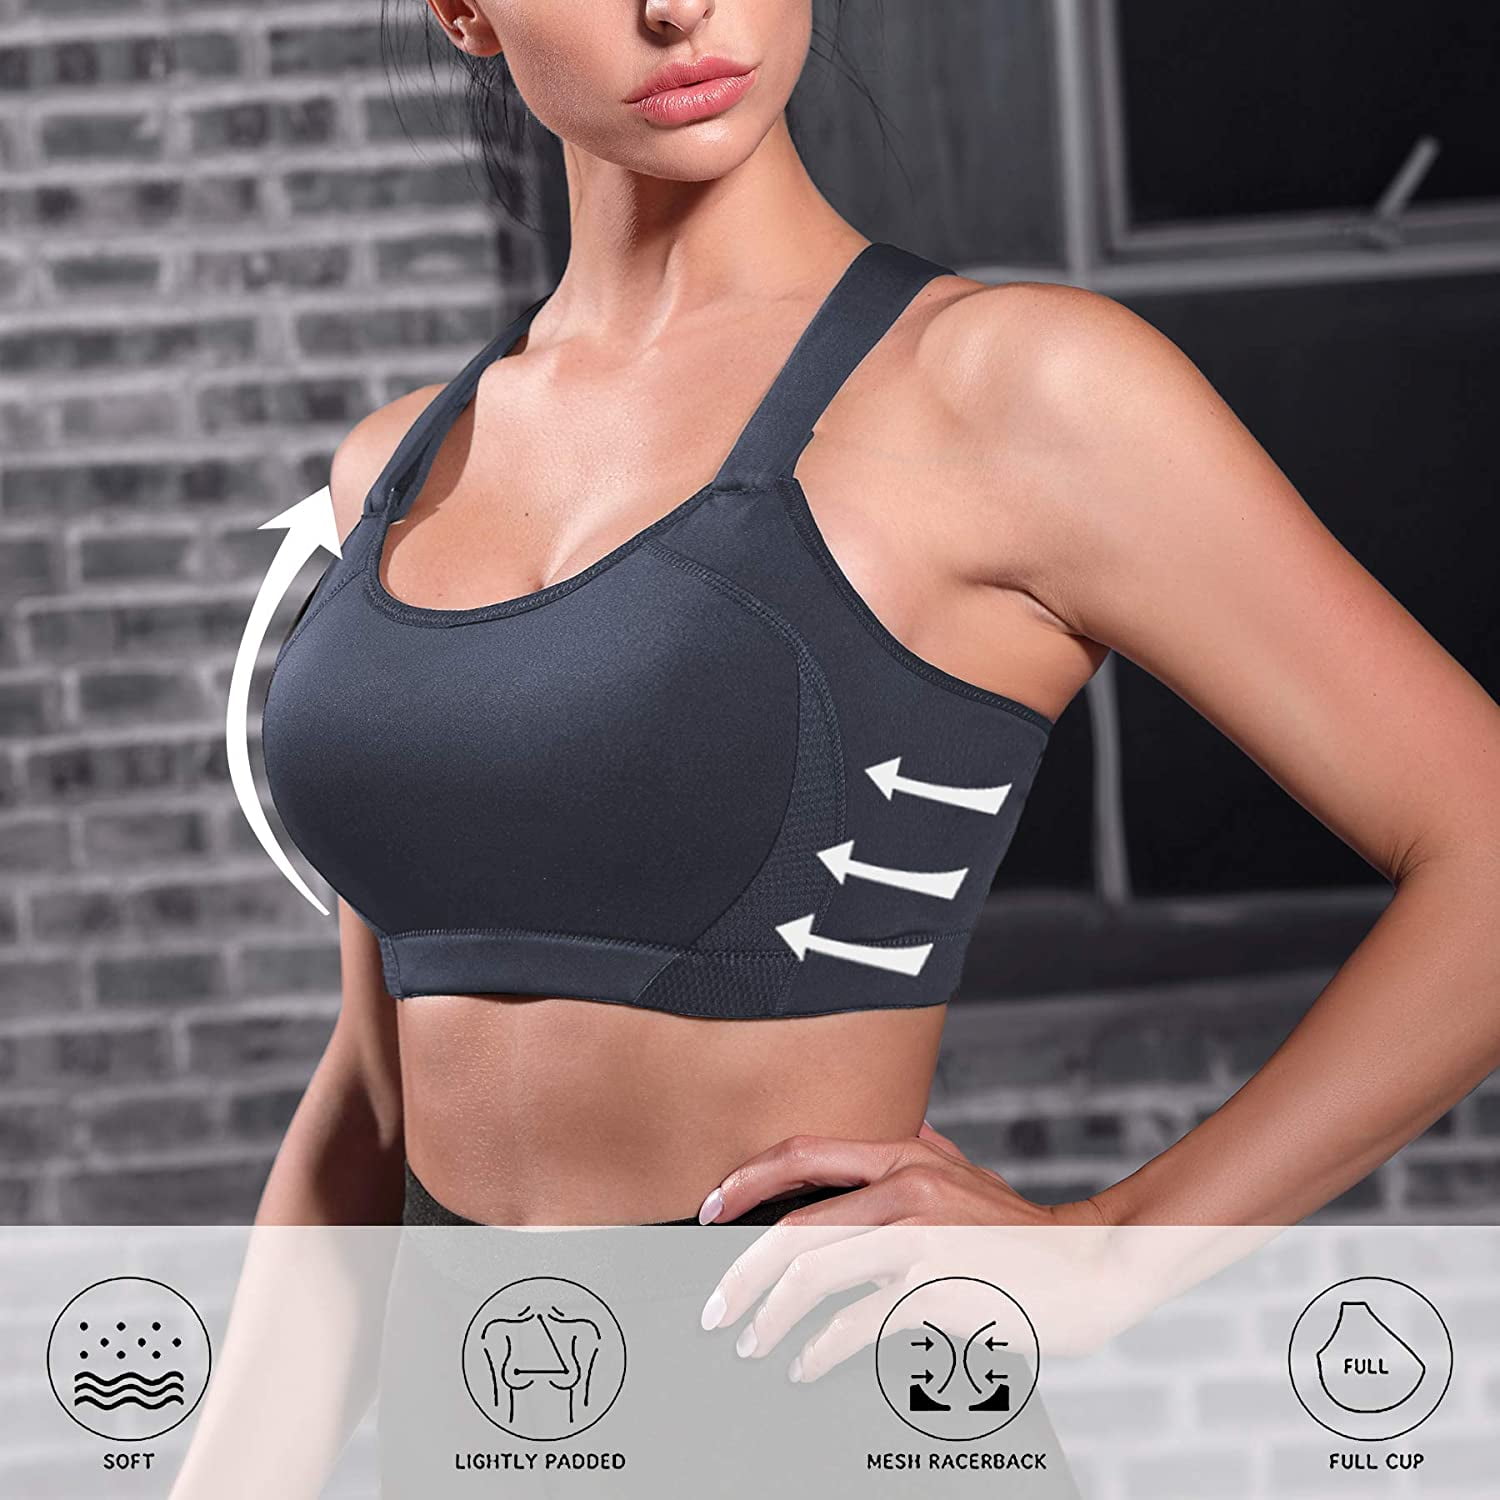 Nebility Women High Impact Racerback Sports Bras Wirefree Front Adjustable  Workout Tops Bounce Control Gym Activewear Bra 